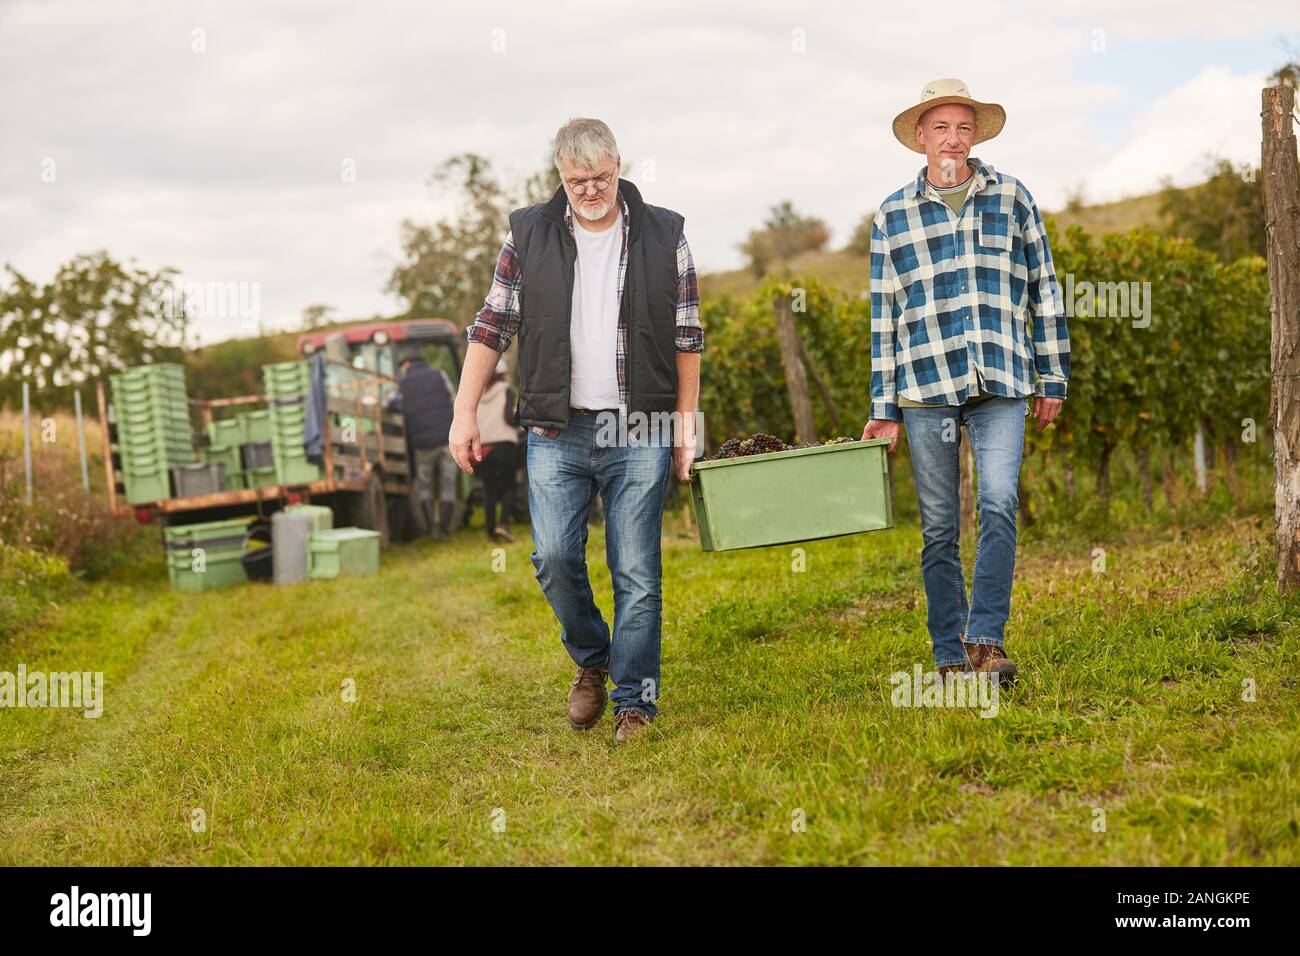 Two harvest helpers carry a harvest box with fresh grapes in the vineyard Stock Photo